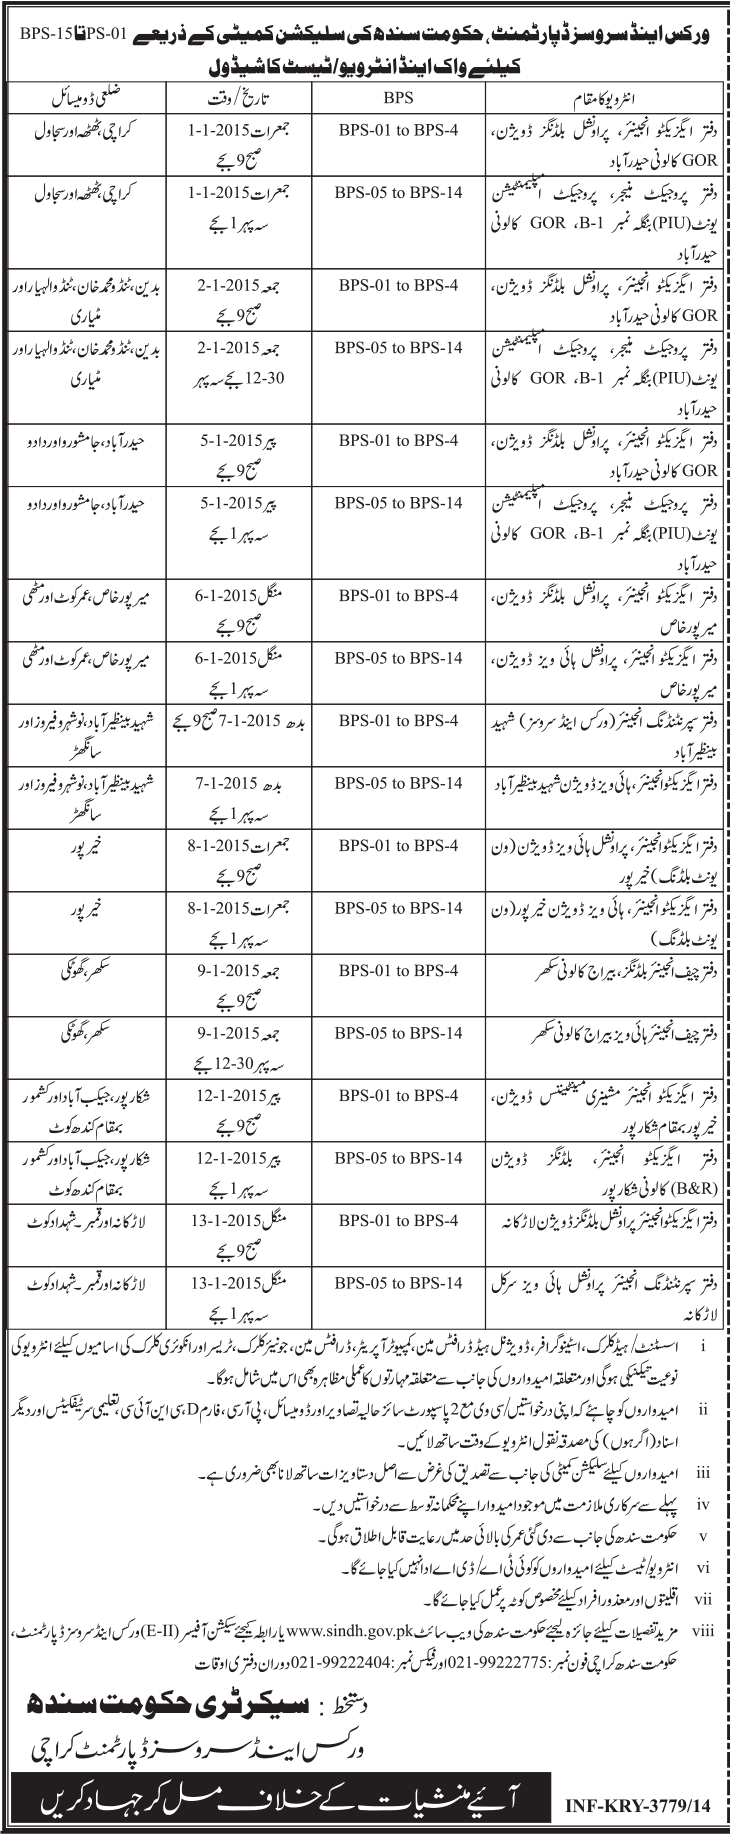 Works And Services Department Sindh Jobs 2014 Test Dates, Interview Schedule 02